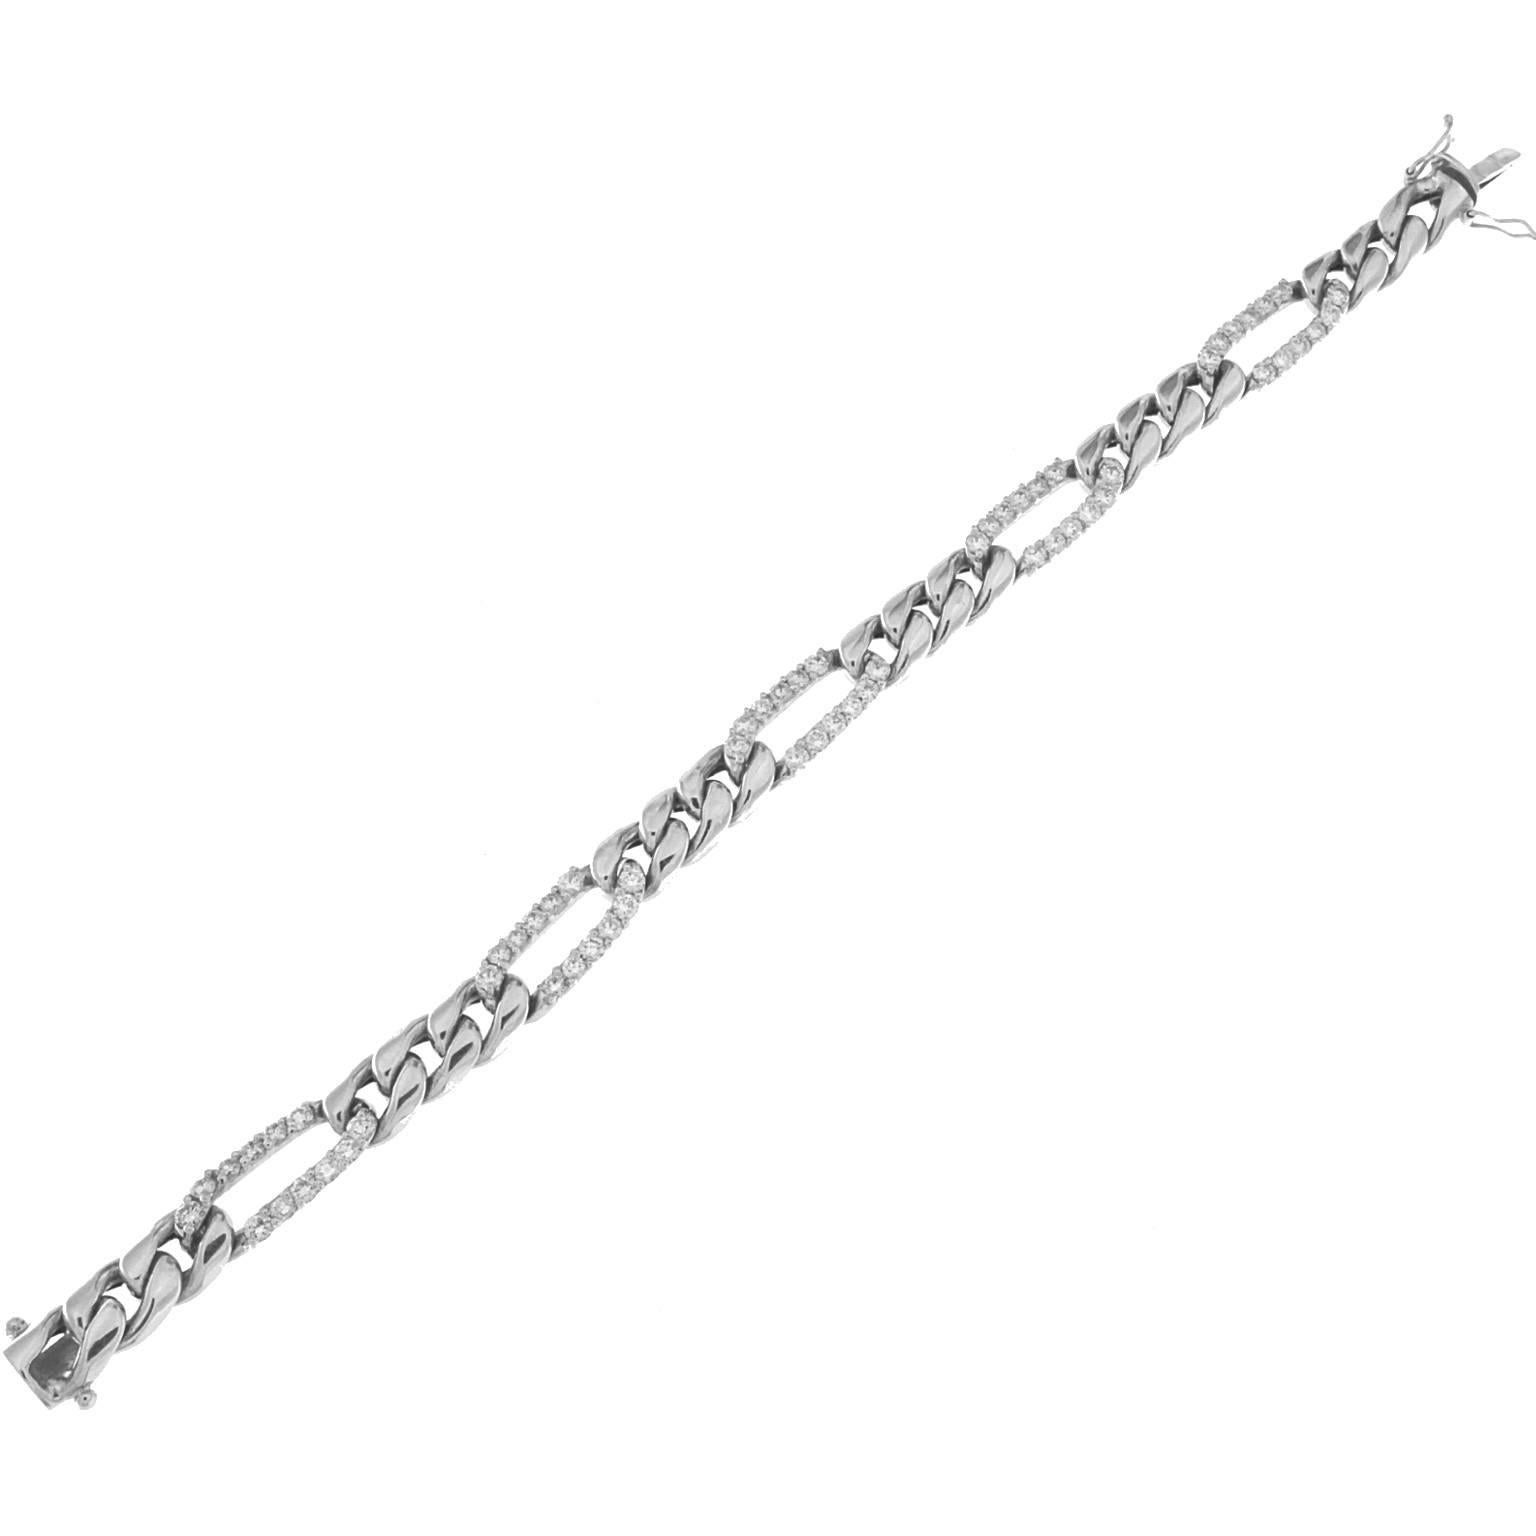 Classic 18k white gold chain bracelet and white diamonds born from the 